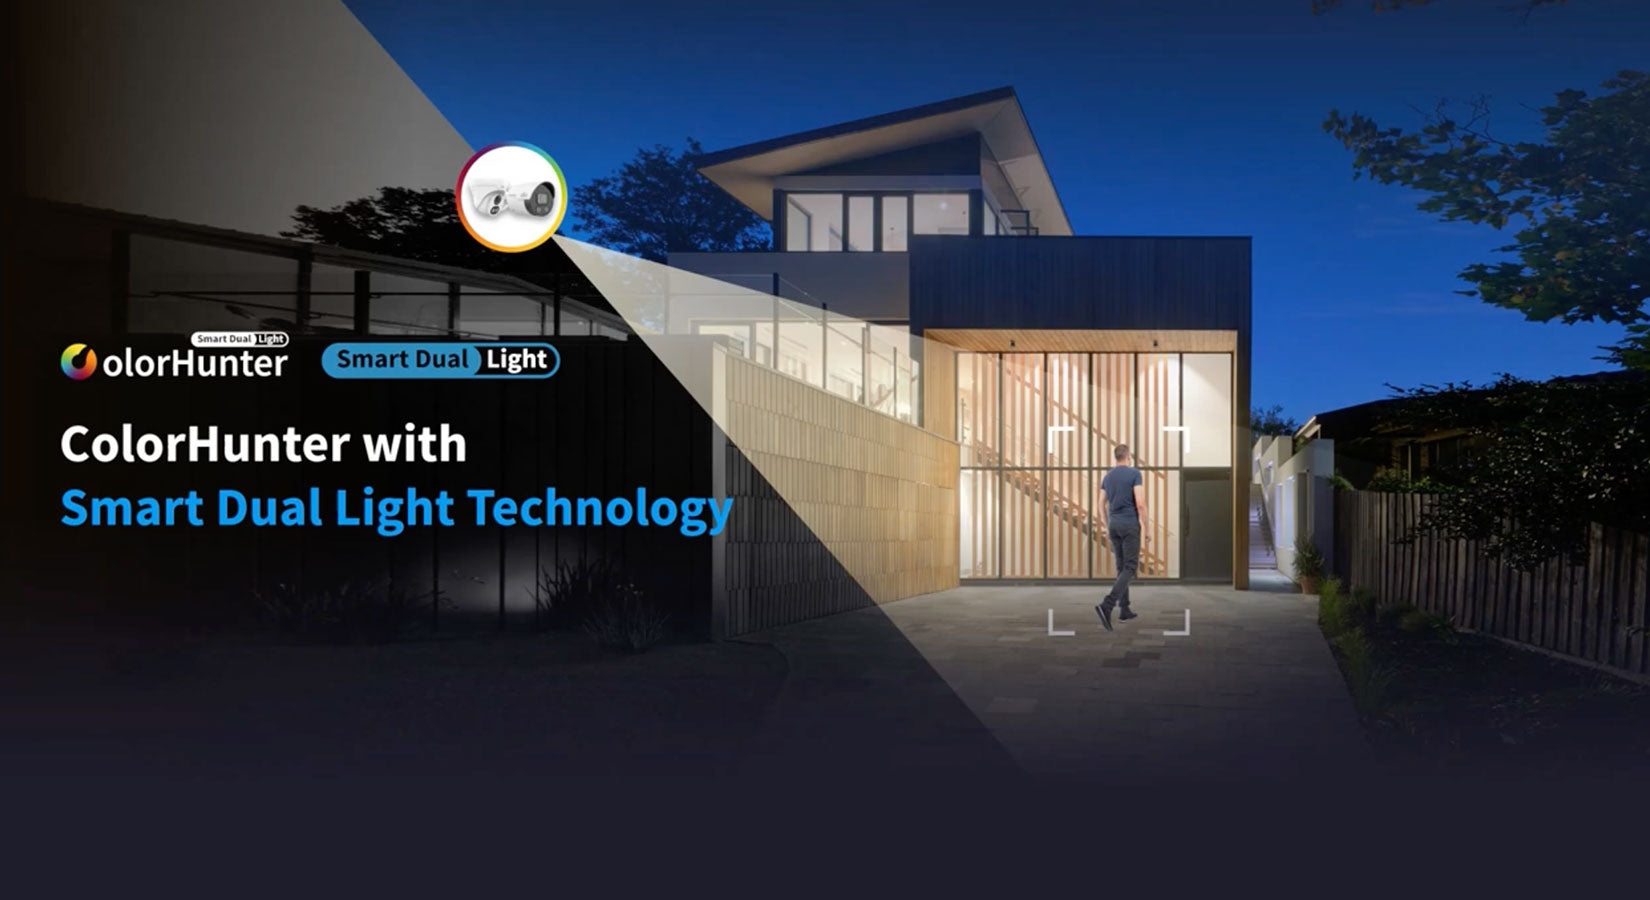 Illuminate Your Security: UNV ColorHunter with Smart Dual Light | All Security Equipment